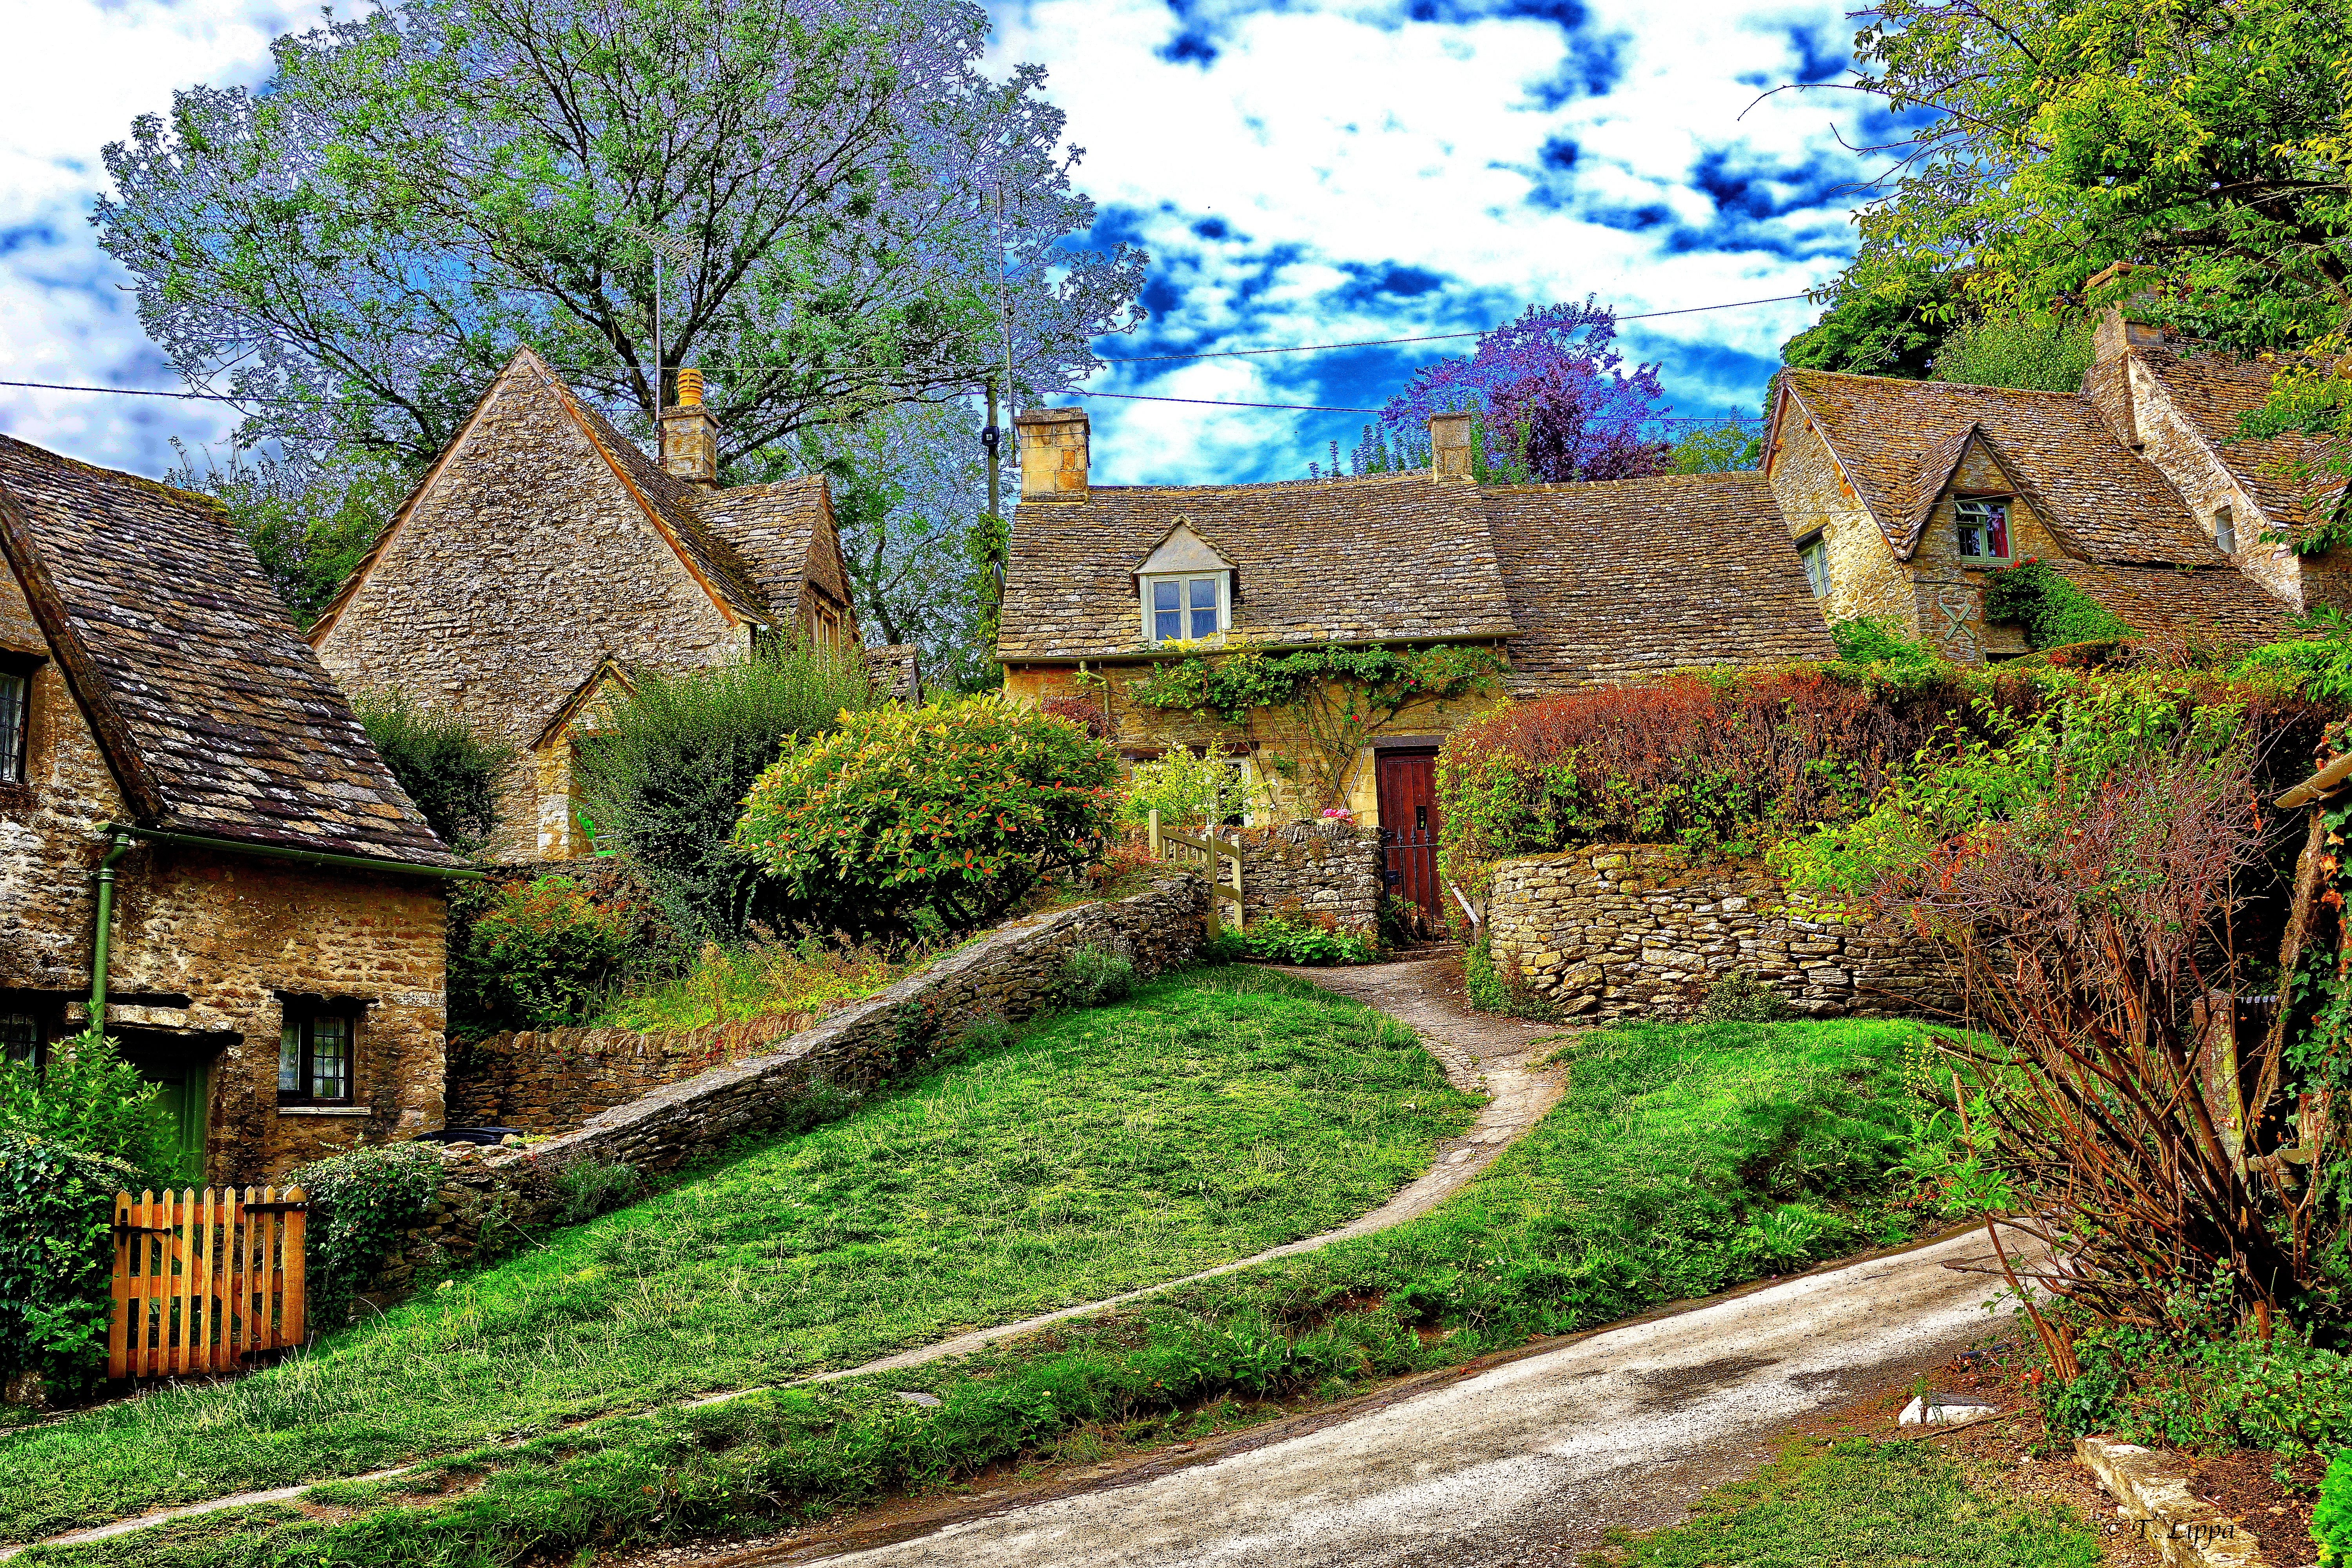 Wallpapers houses Cotswolds England on the desktop